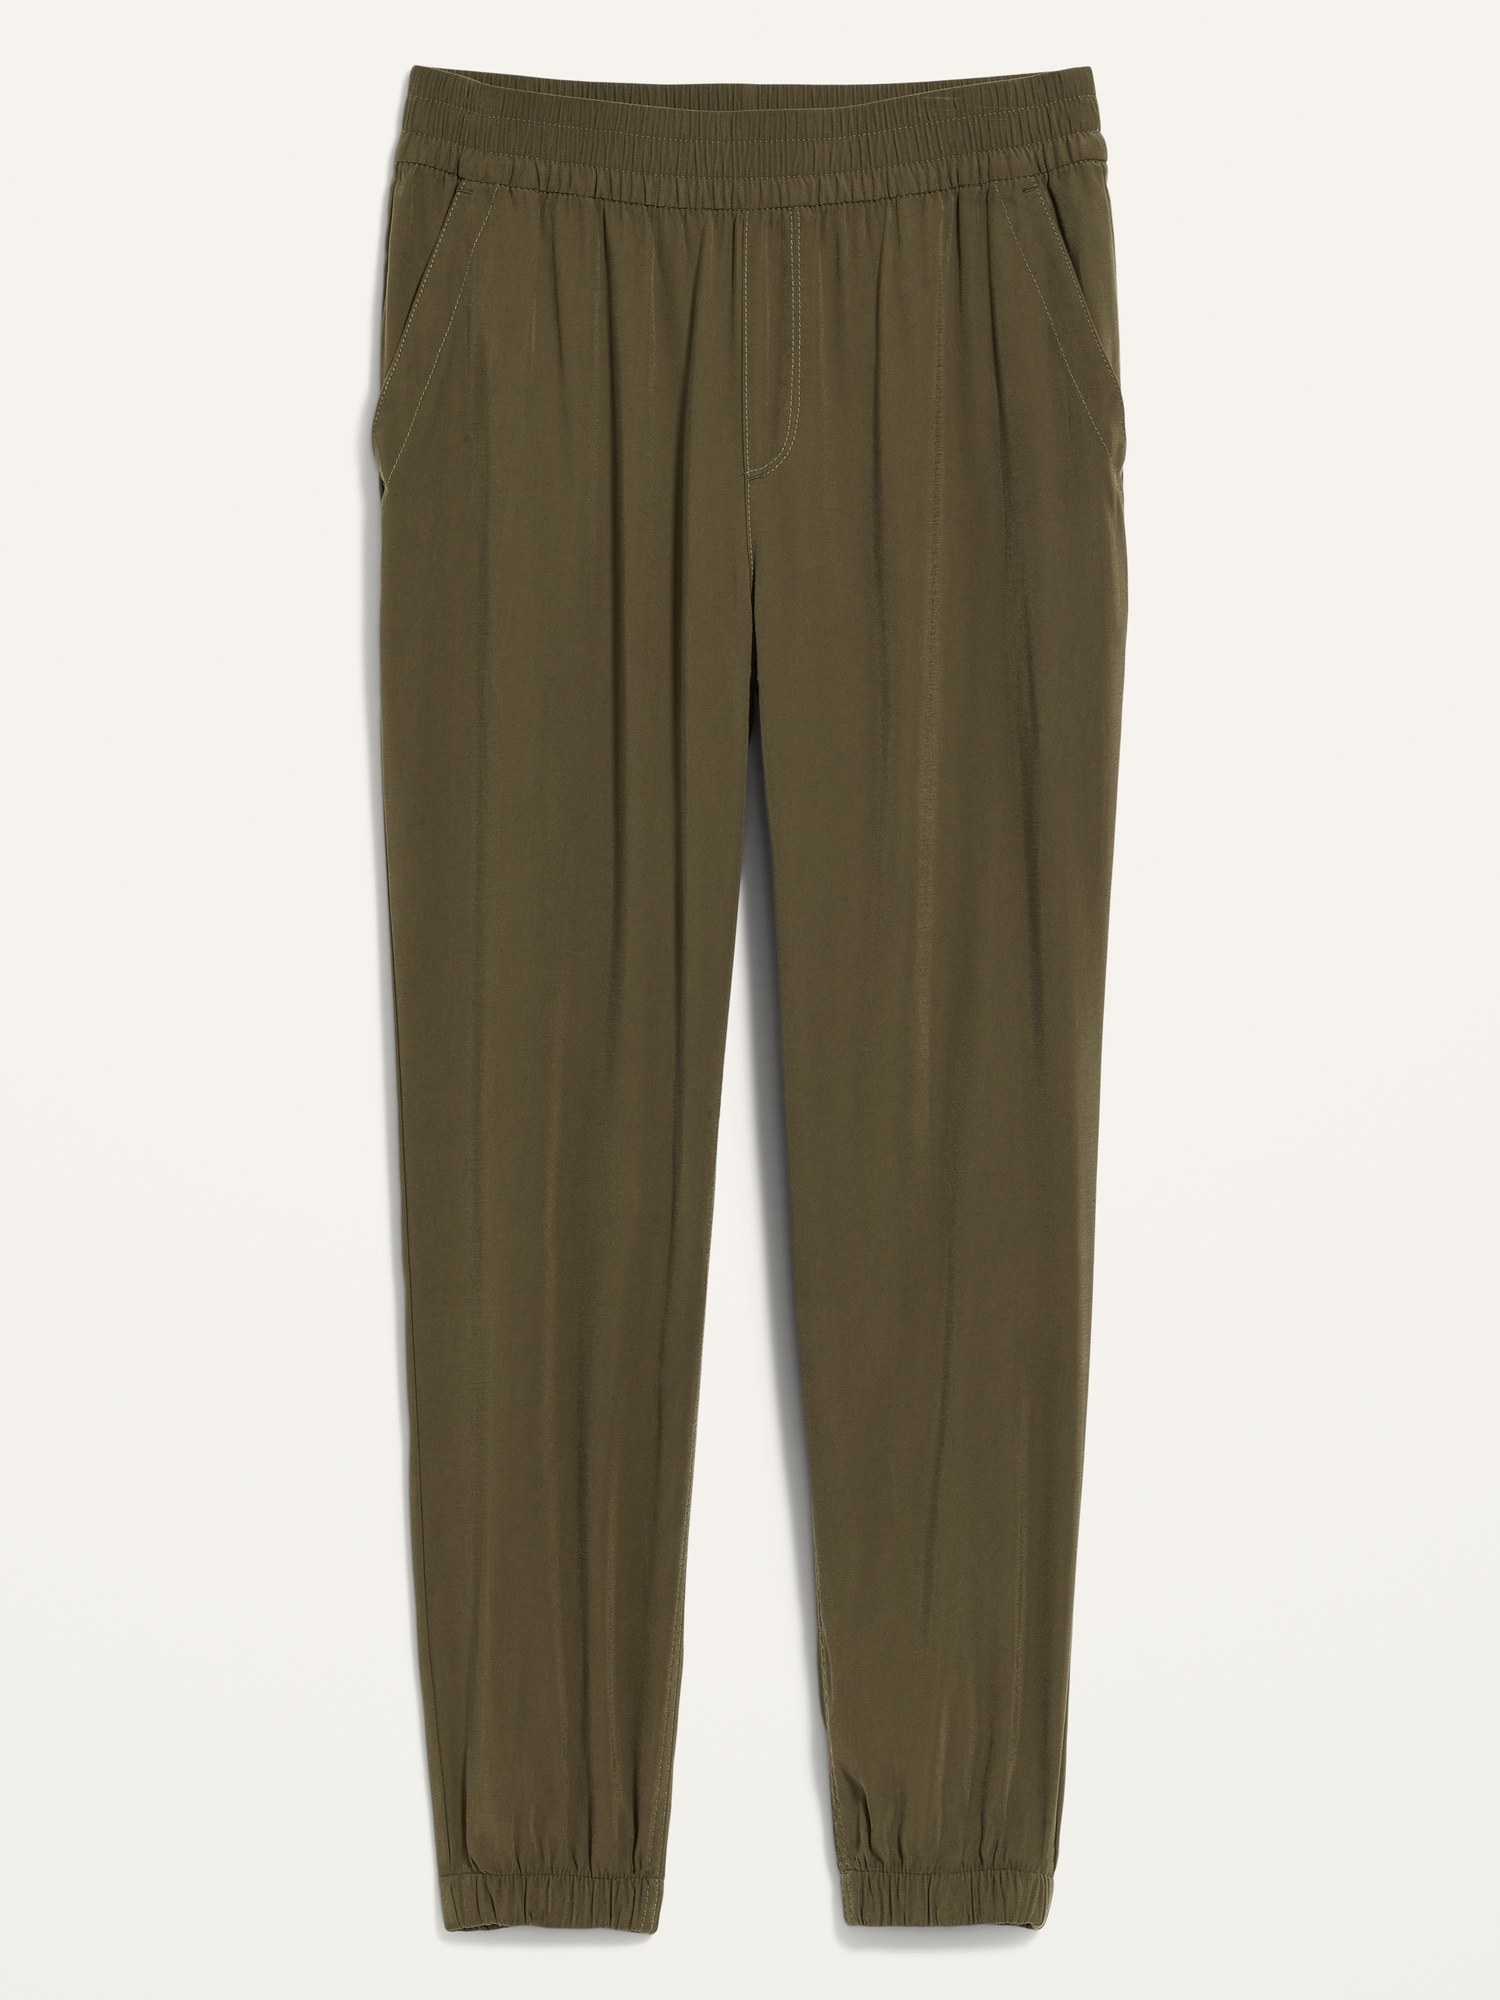 High-Waisted Twill Jogger Pants for Women